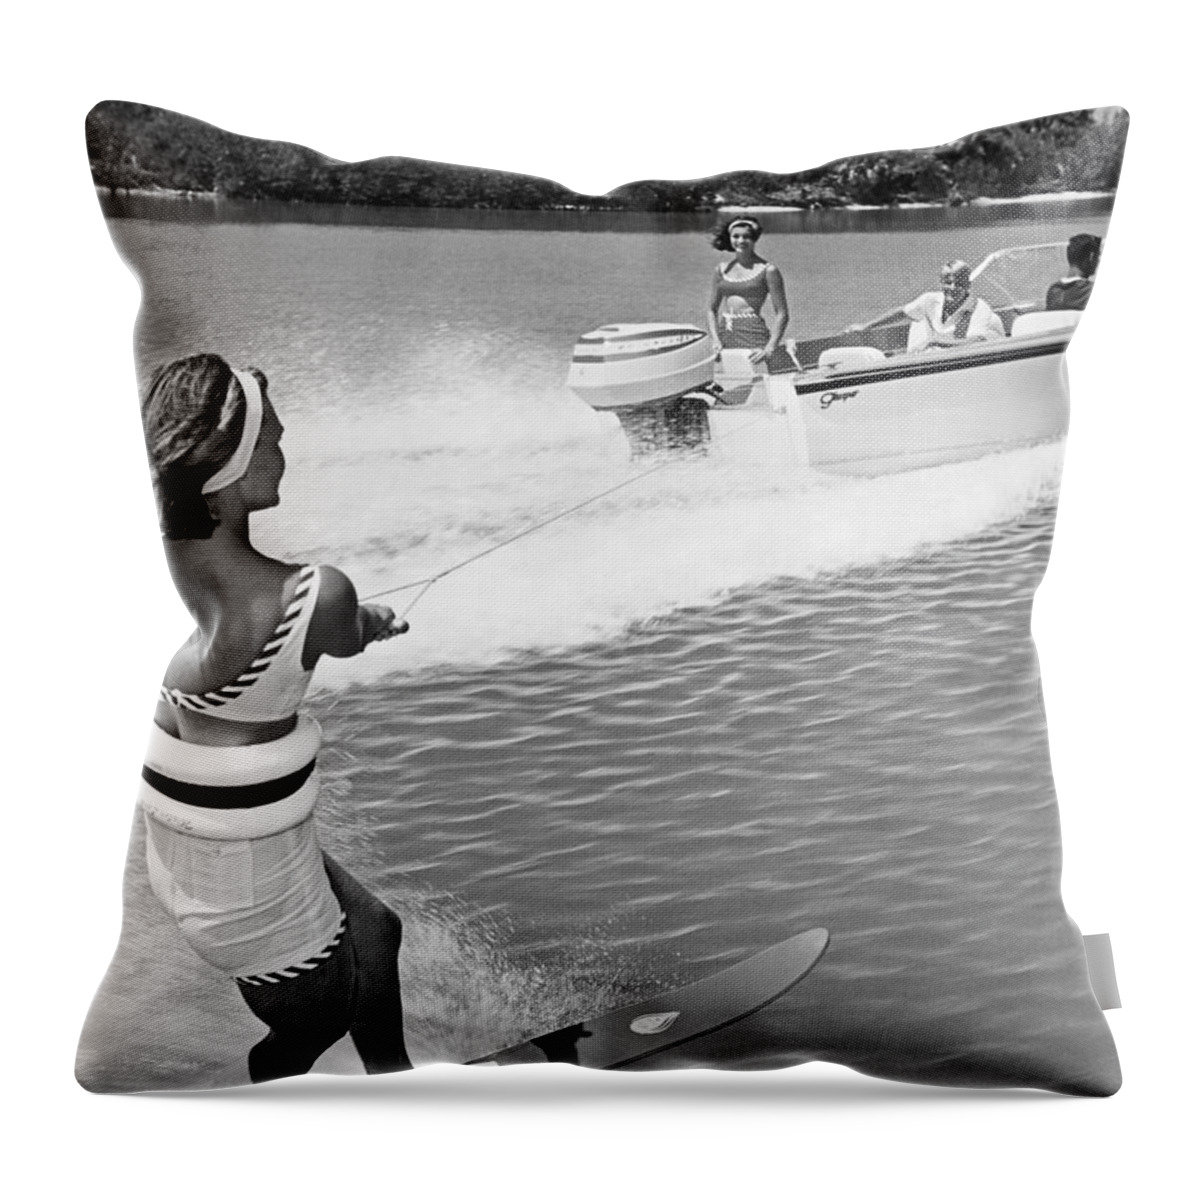 1960s Throw Pillow featuring the photograph Young Woman Slalom Water Skis by Underwood Archives